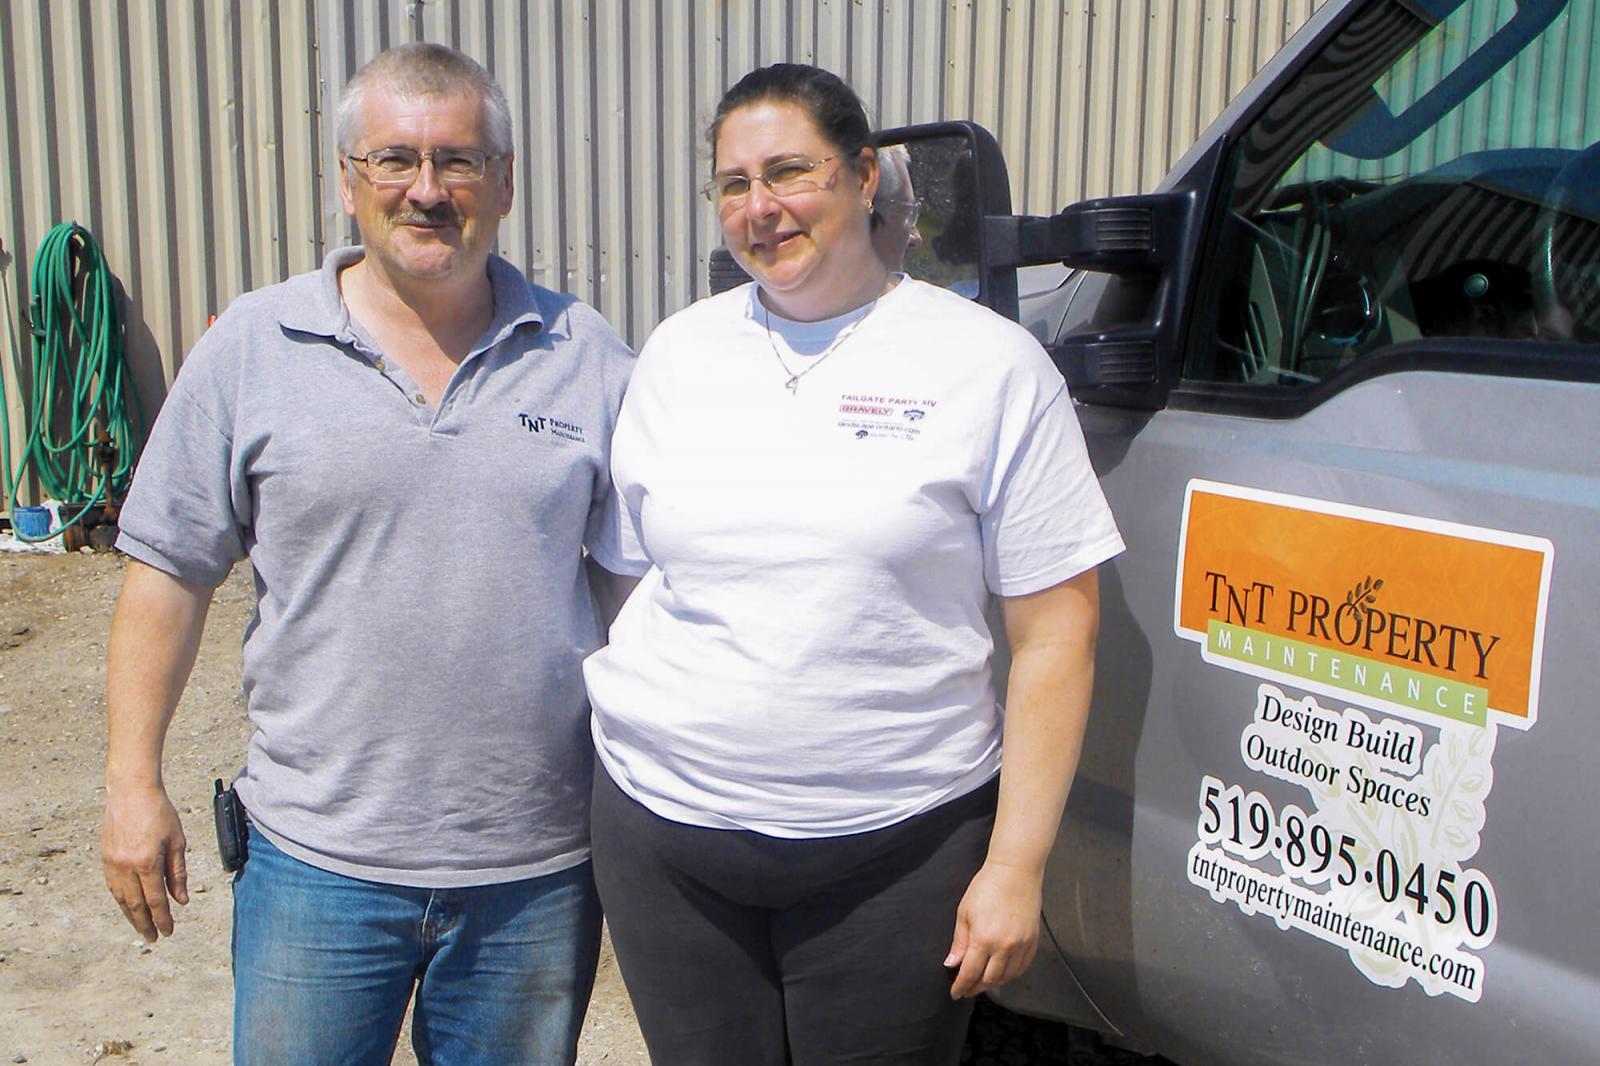 Rob and Linda Tester work hard for both their business and community.